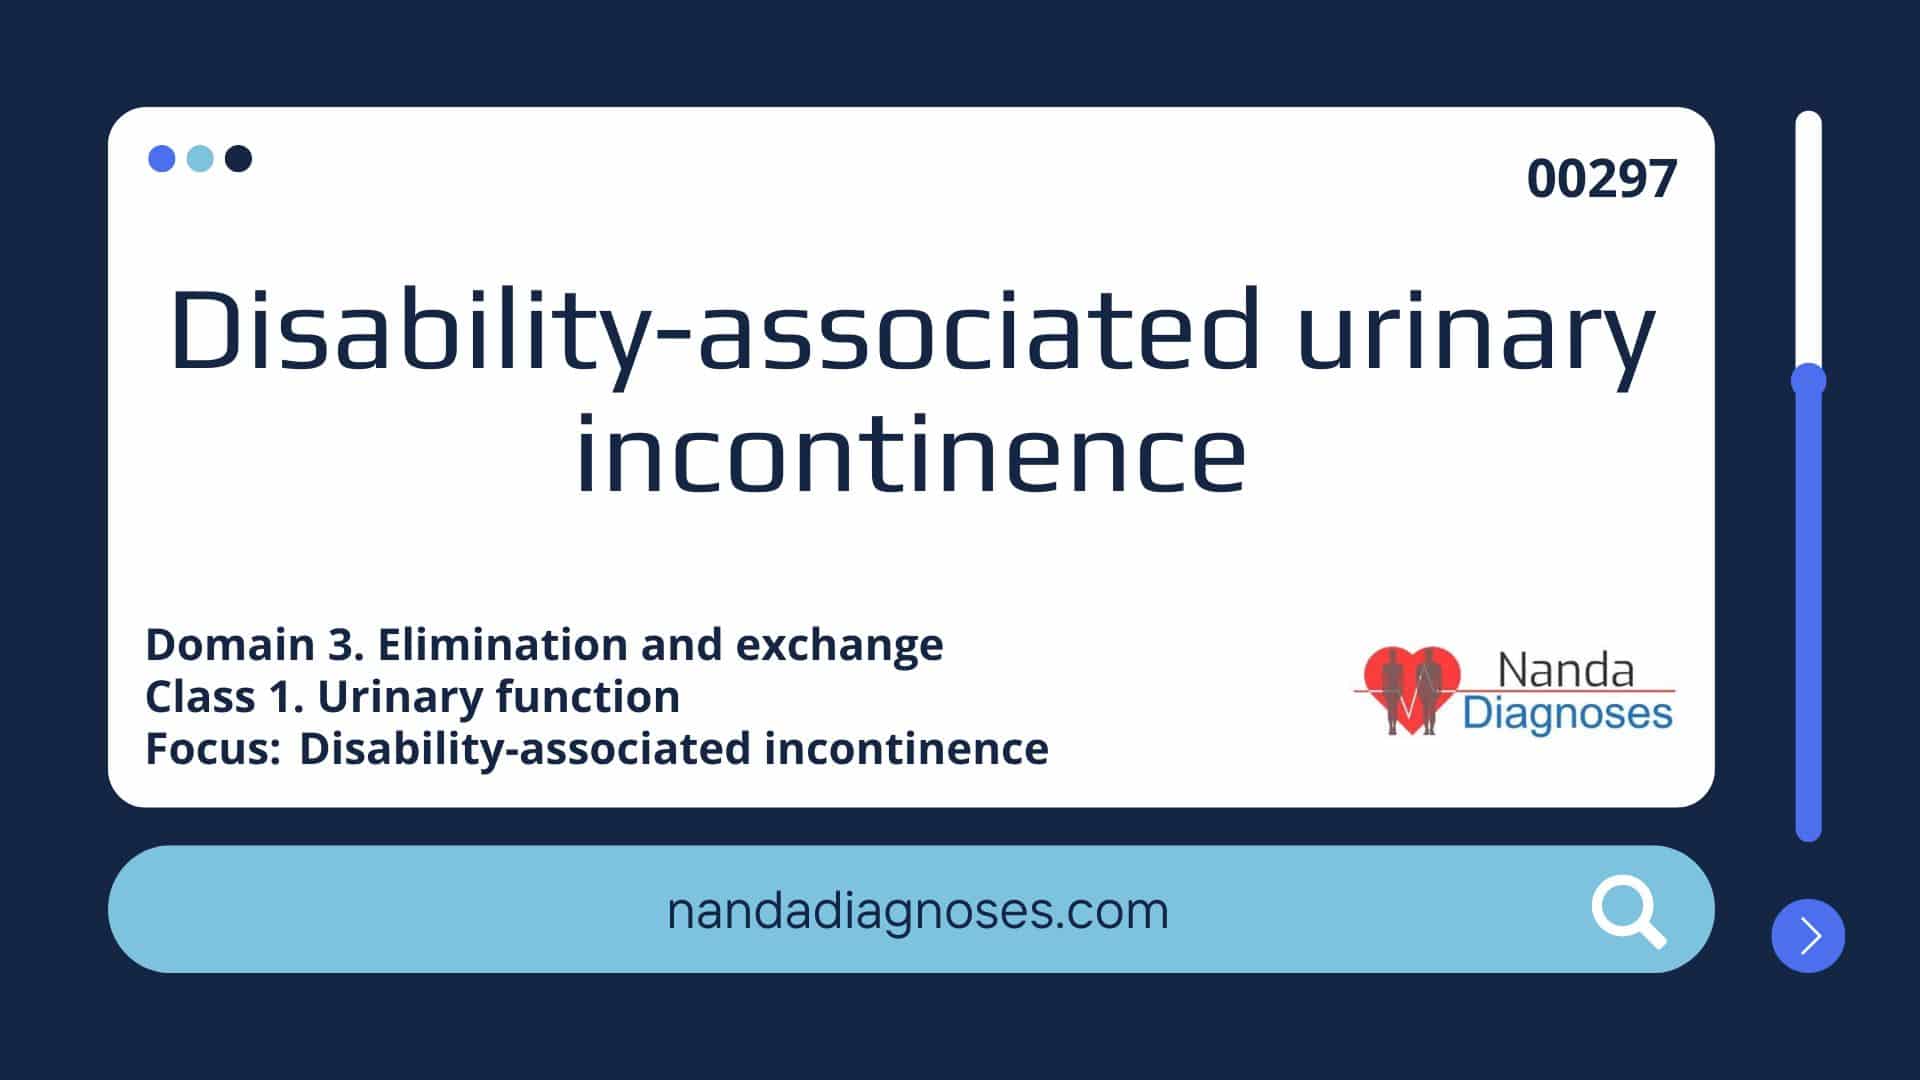 Disability-associated urinary incontinence